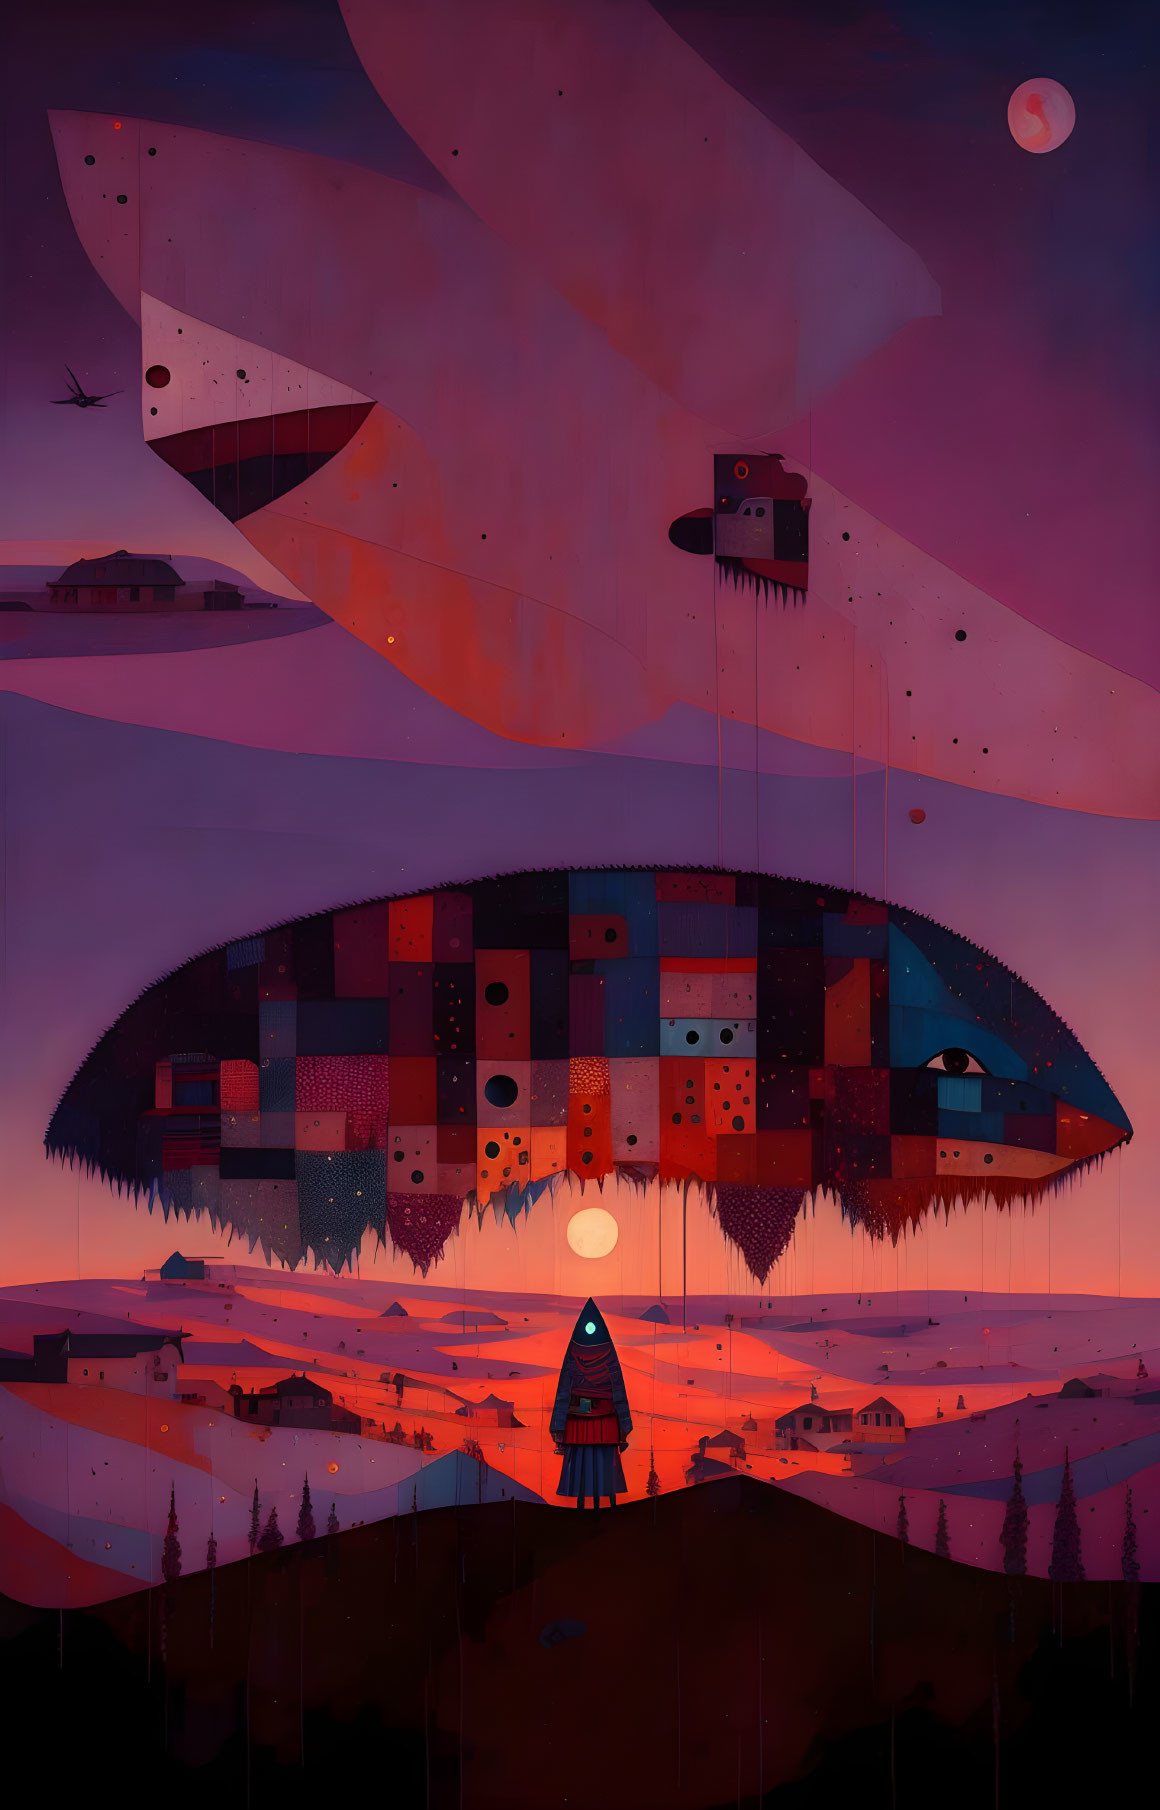 ai, floating ufo creature at sunset, patchwork